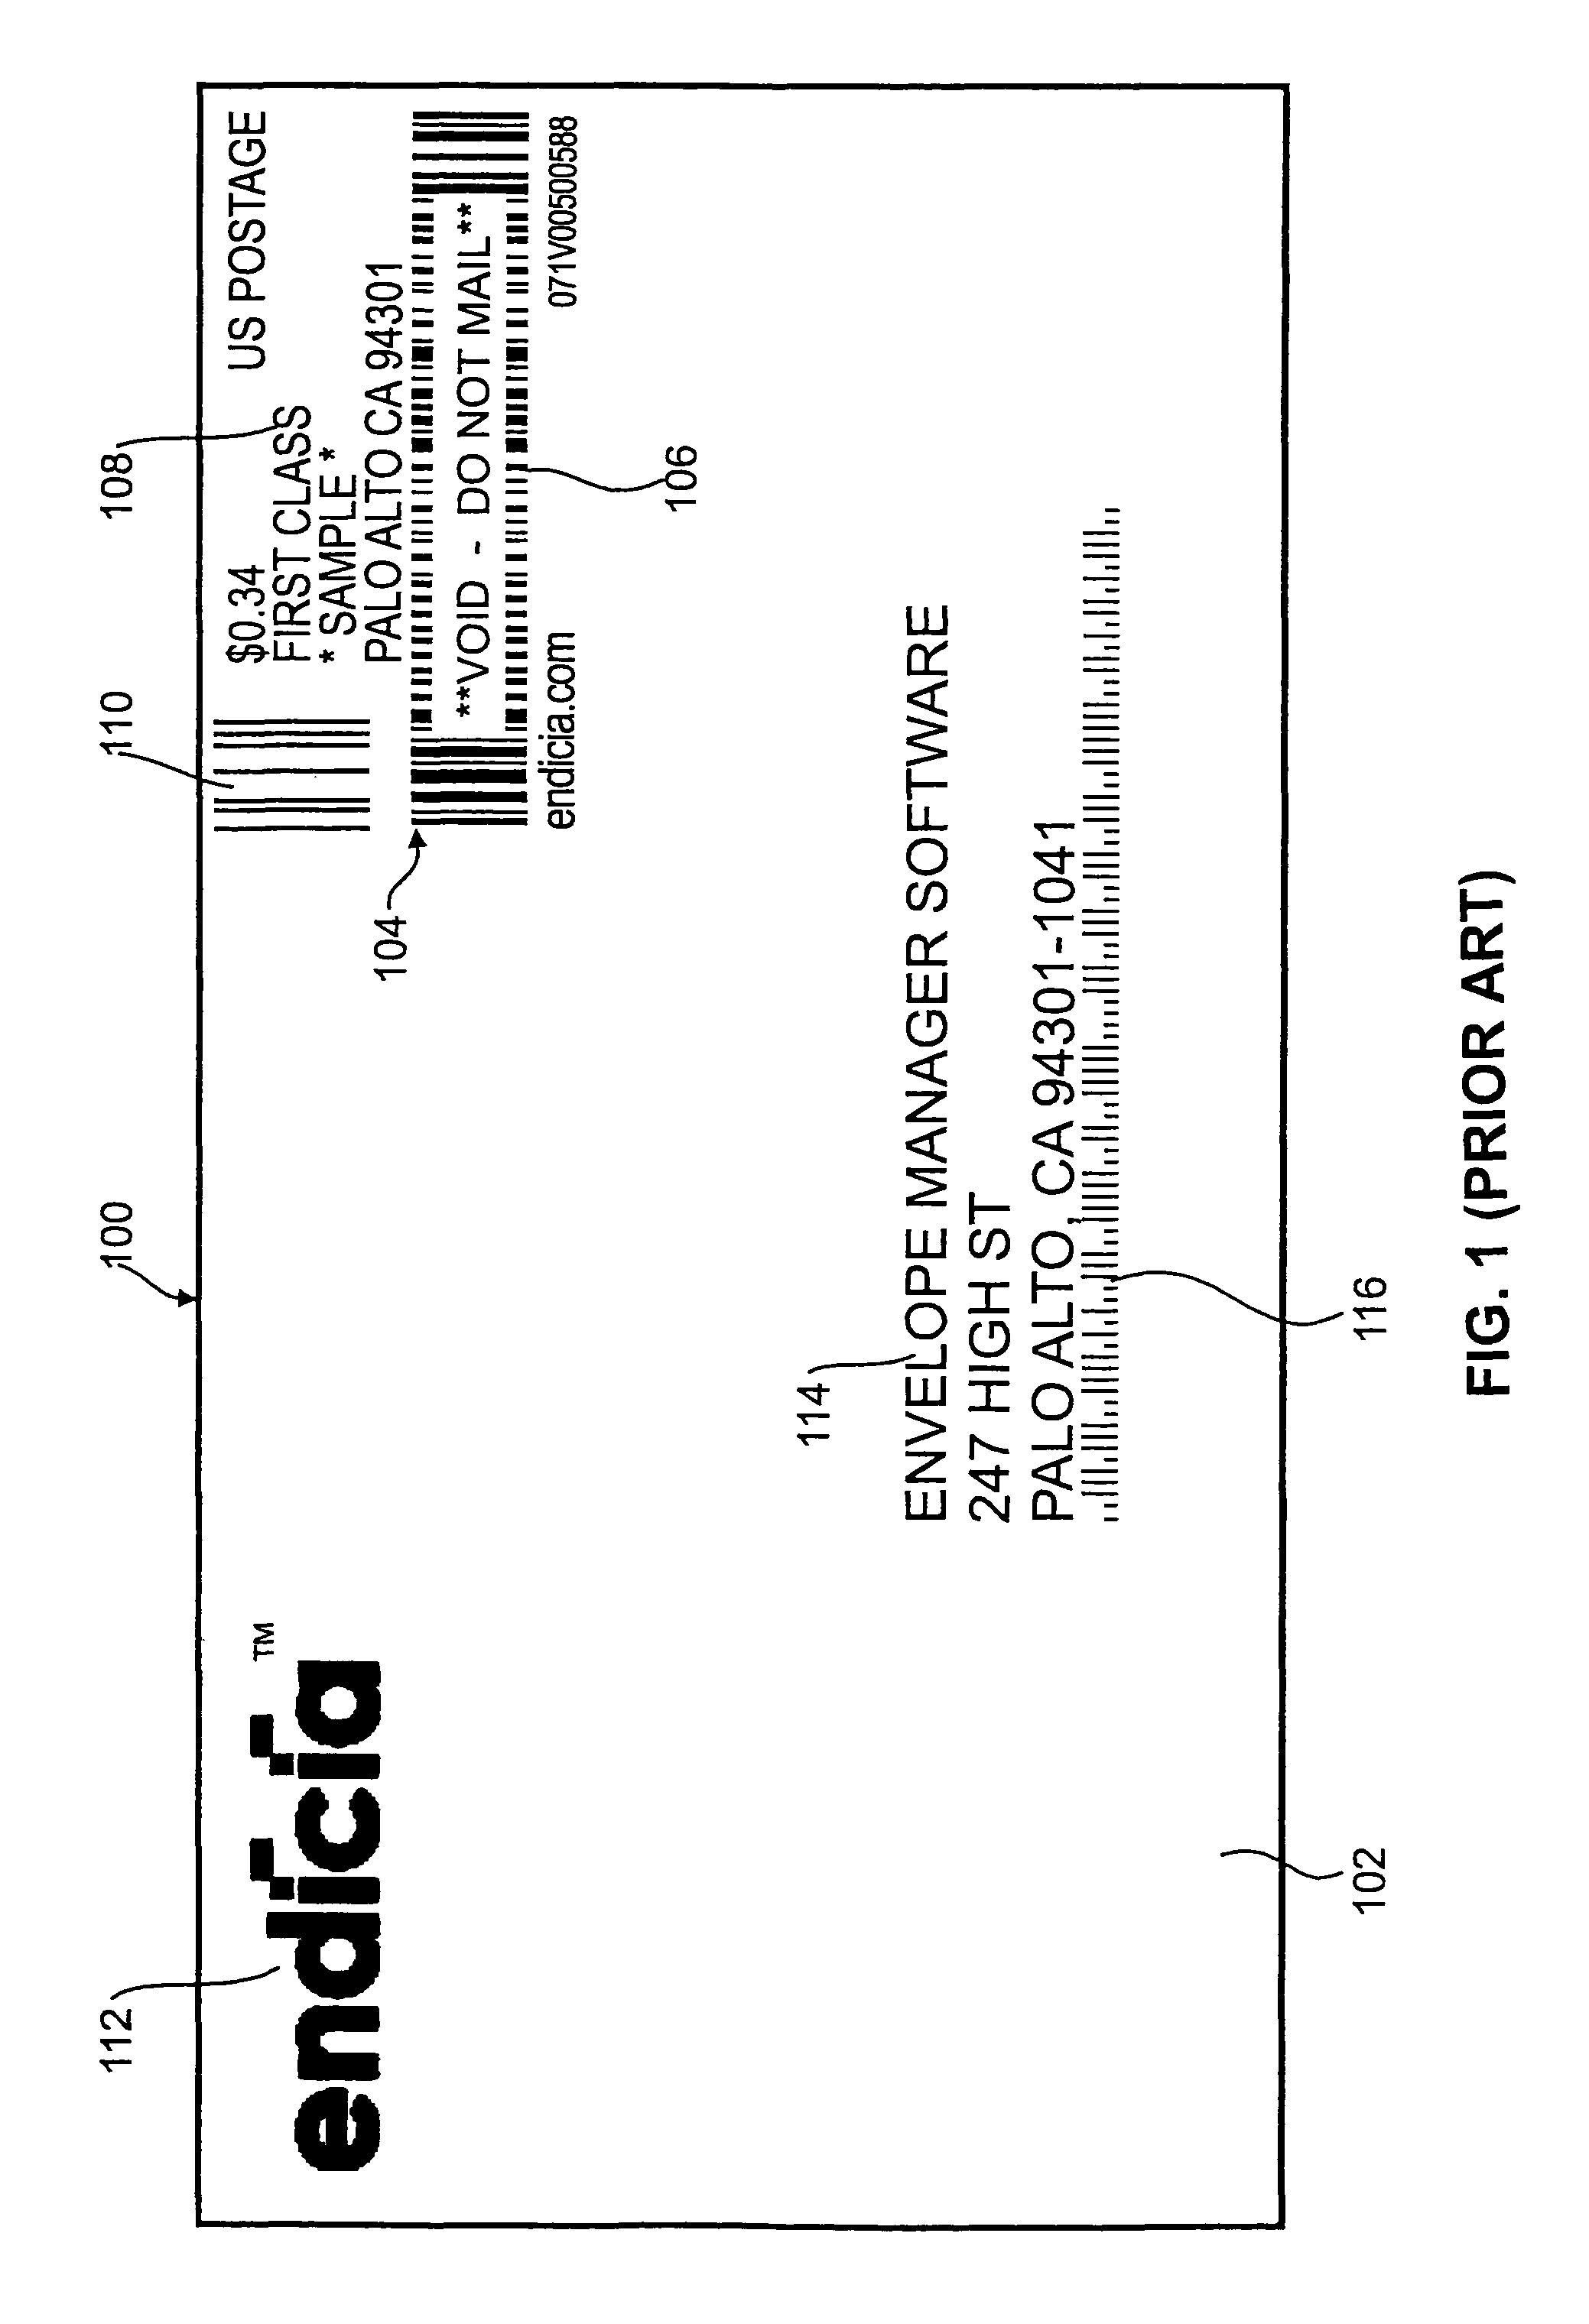 Systems and methods for detecting postage fraud using an indexed lookup procedure